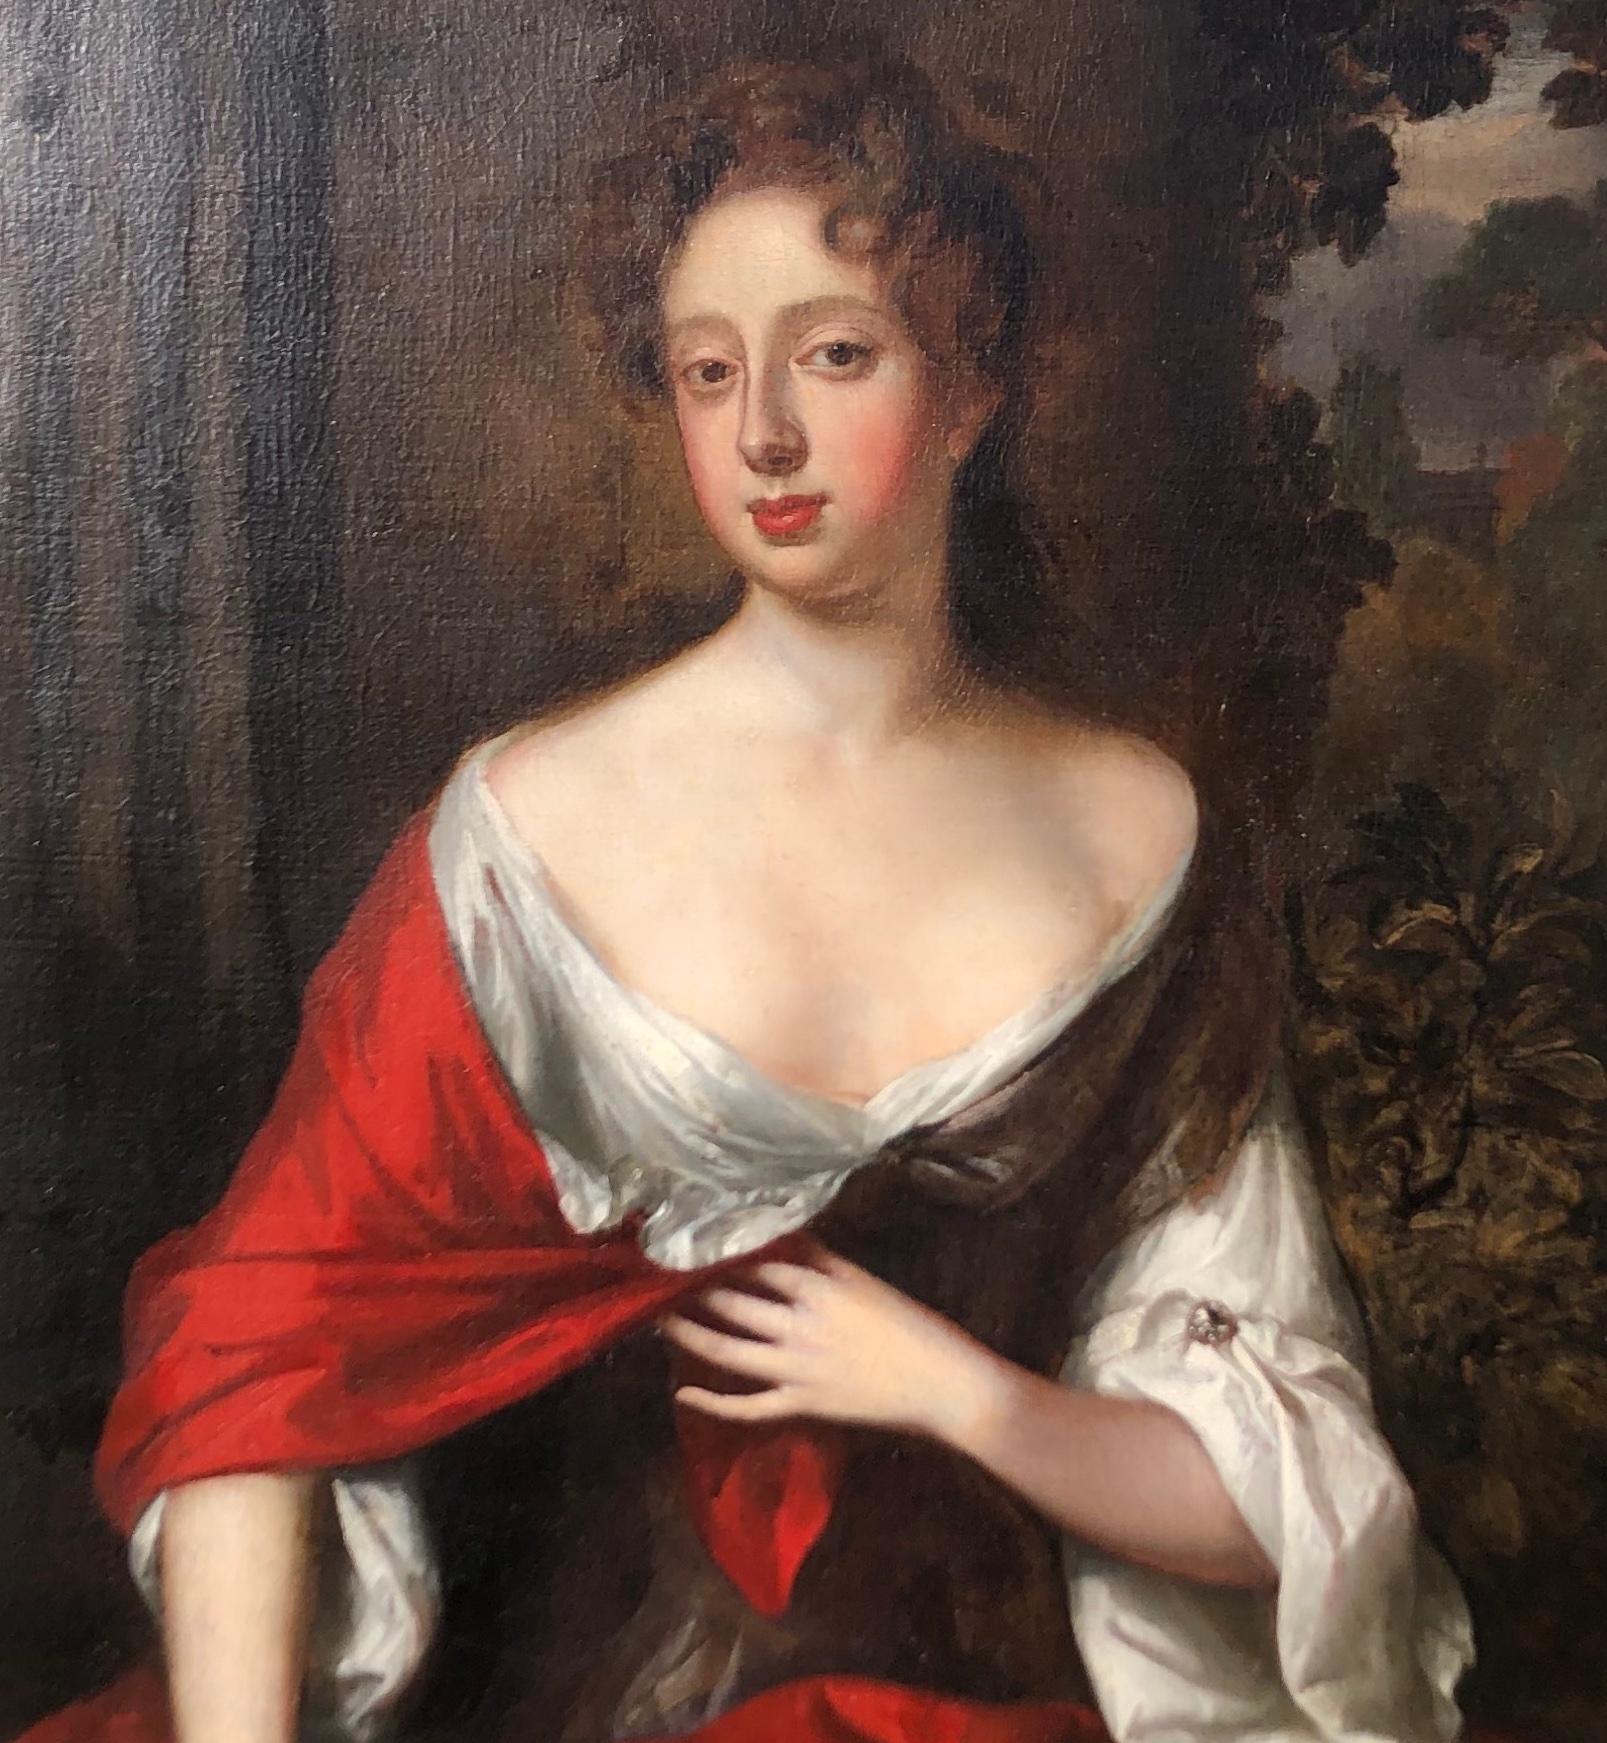 Oil Painting, Three Quarter length Portrait of Lady Elizabeth Percy by the studio of Sir Peter Lely (1618-1680)
Housed in a good period, swept ornate frame.

Lady Elizabeth Percy, later wife of Charles, 6th Duke of Somerset, 

Elizabeth Seymour,